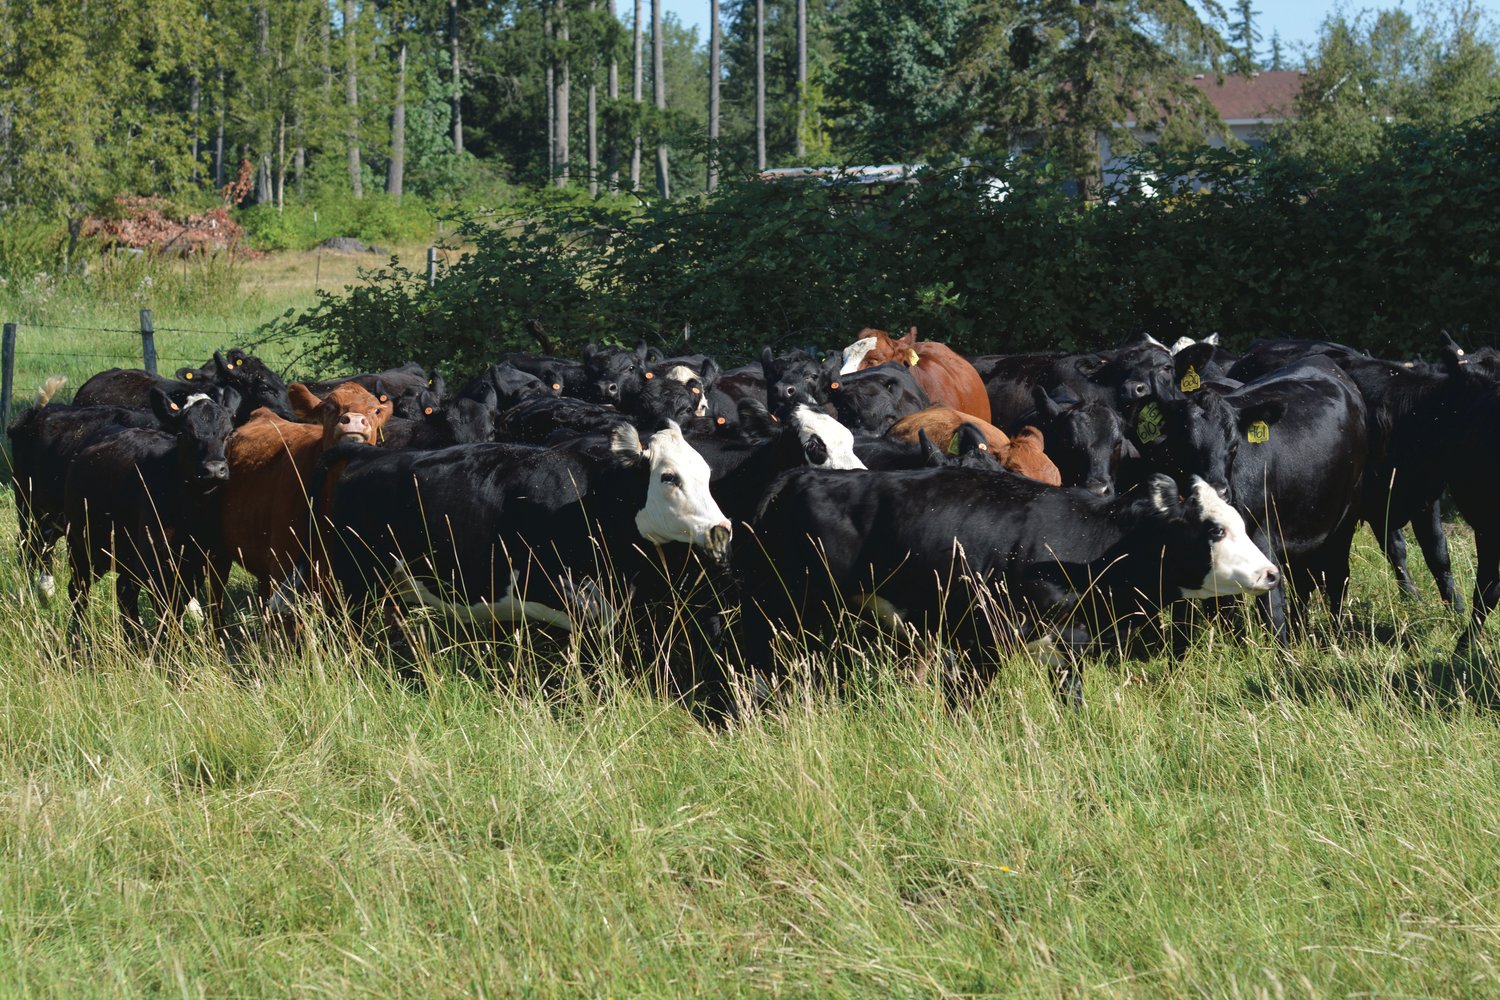 A portion of Lester’s herd began to run across the field on Monday, Aug. 8.